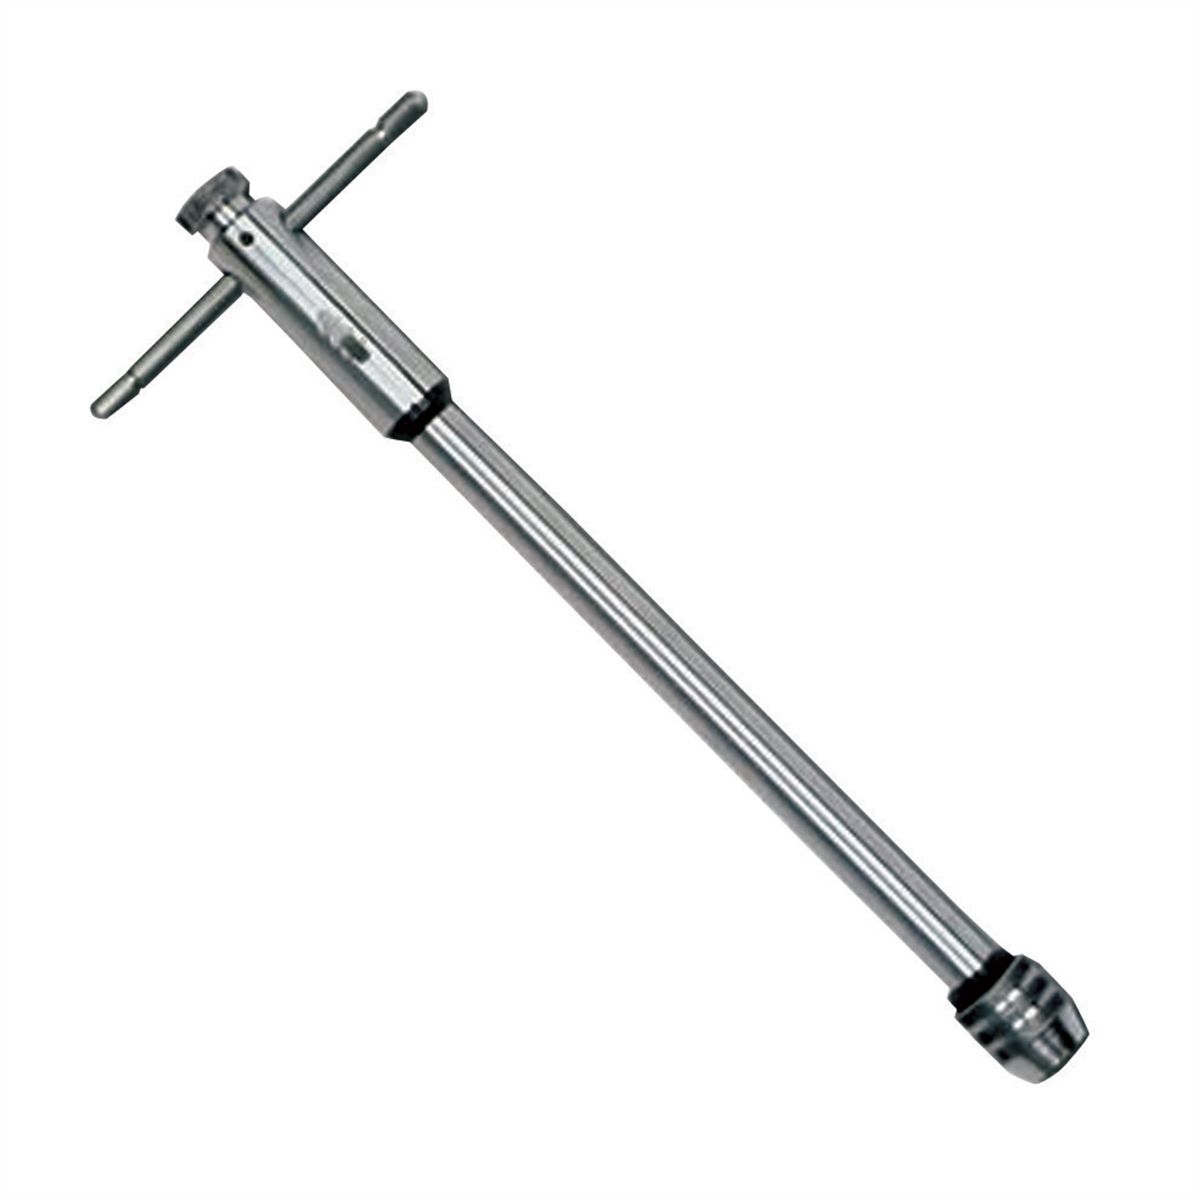 Rachet Tap Wrench - 1/4 to 1/2 Inch Carded